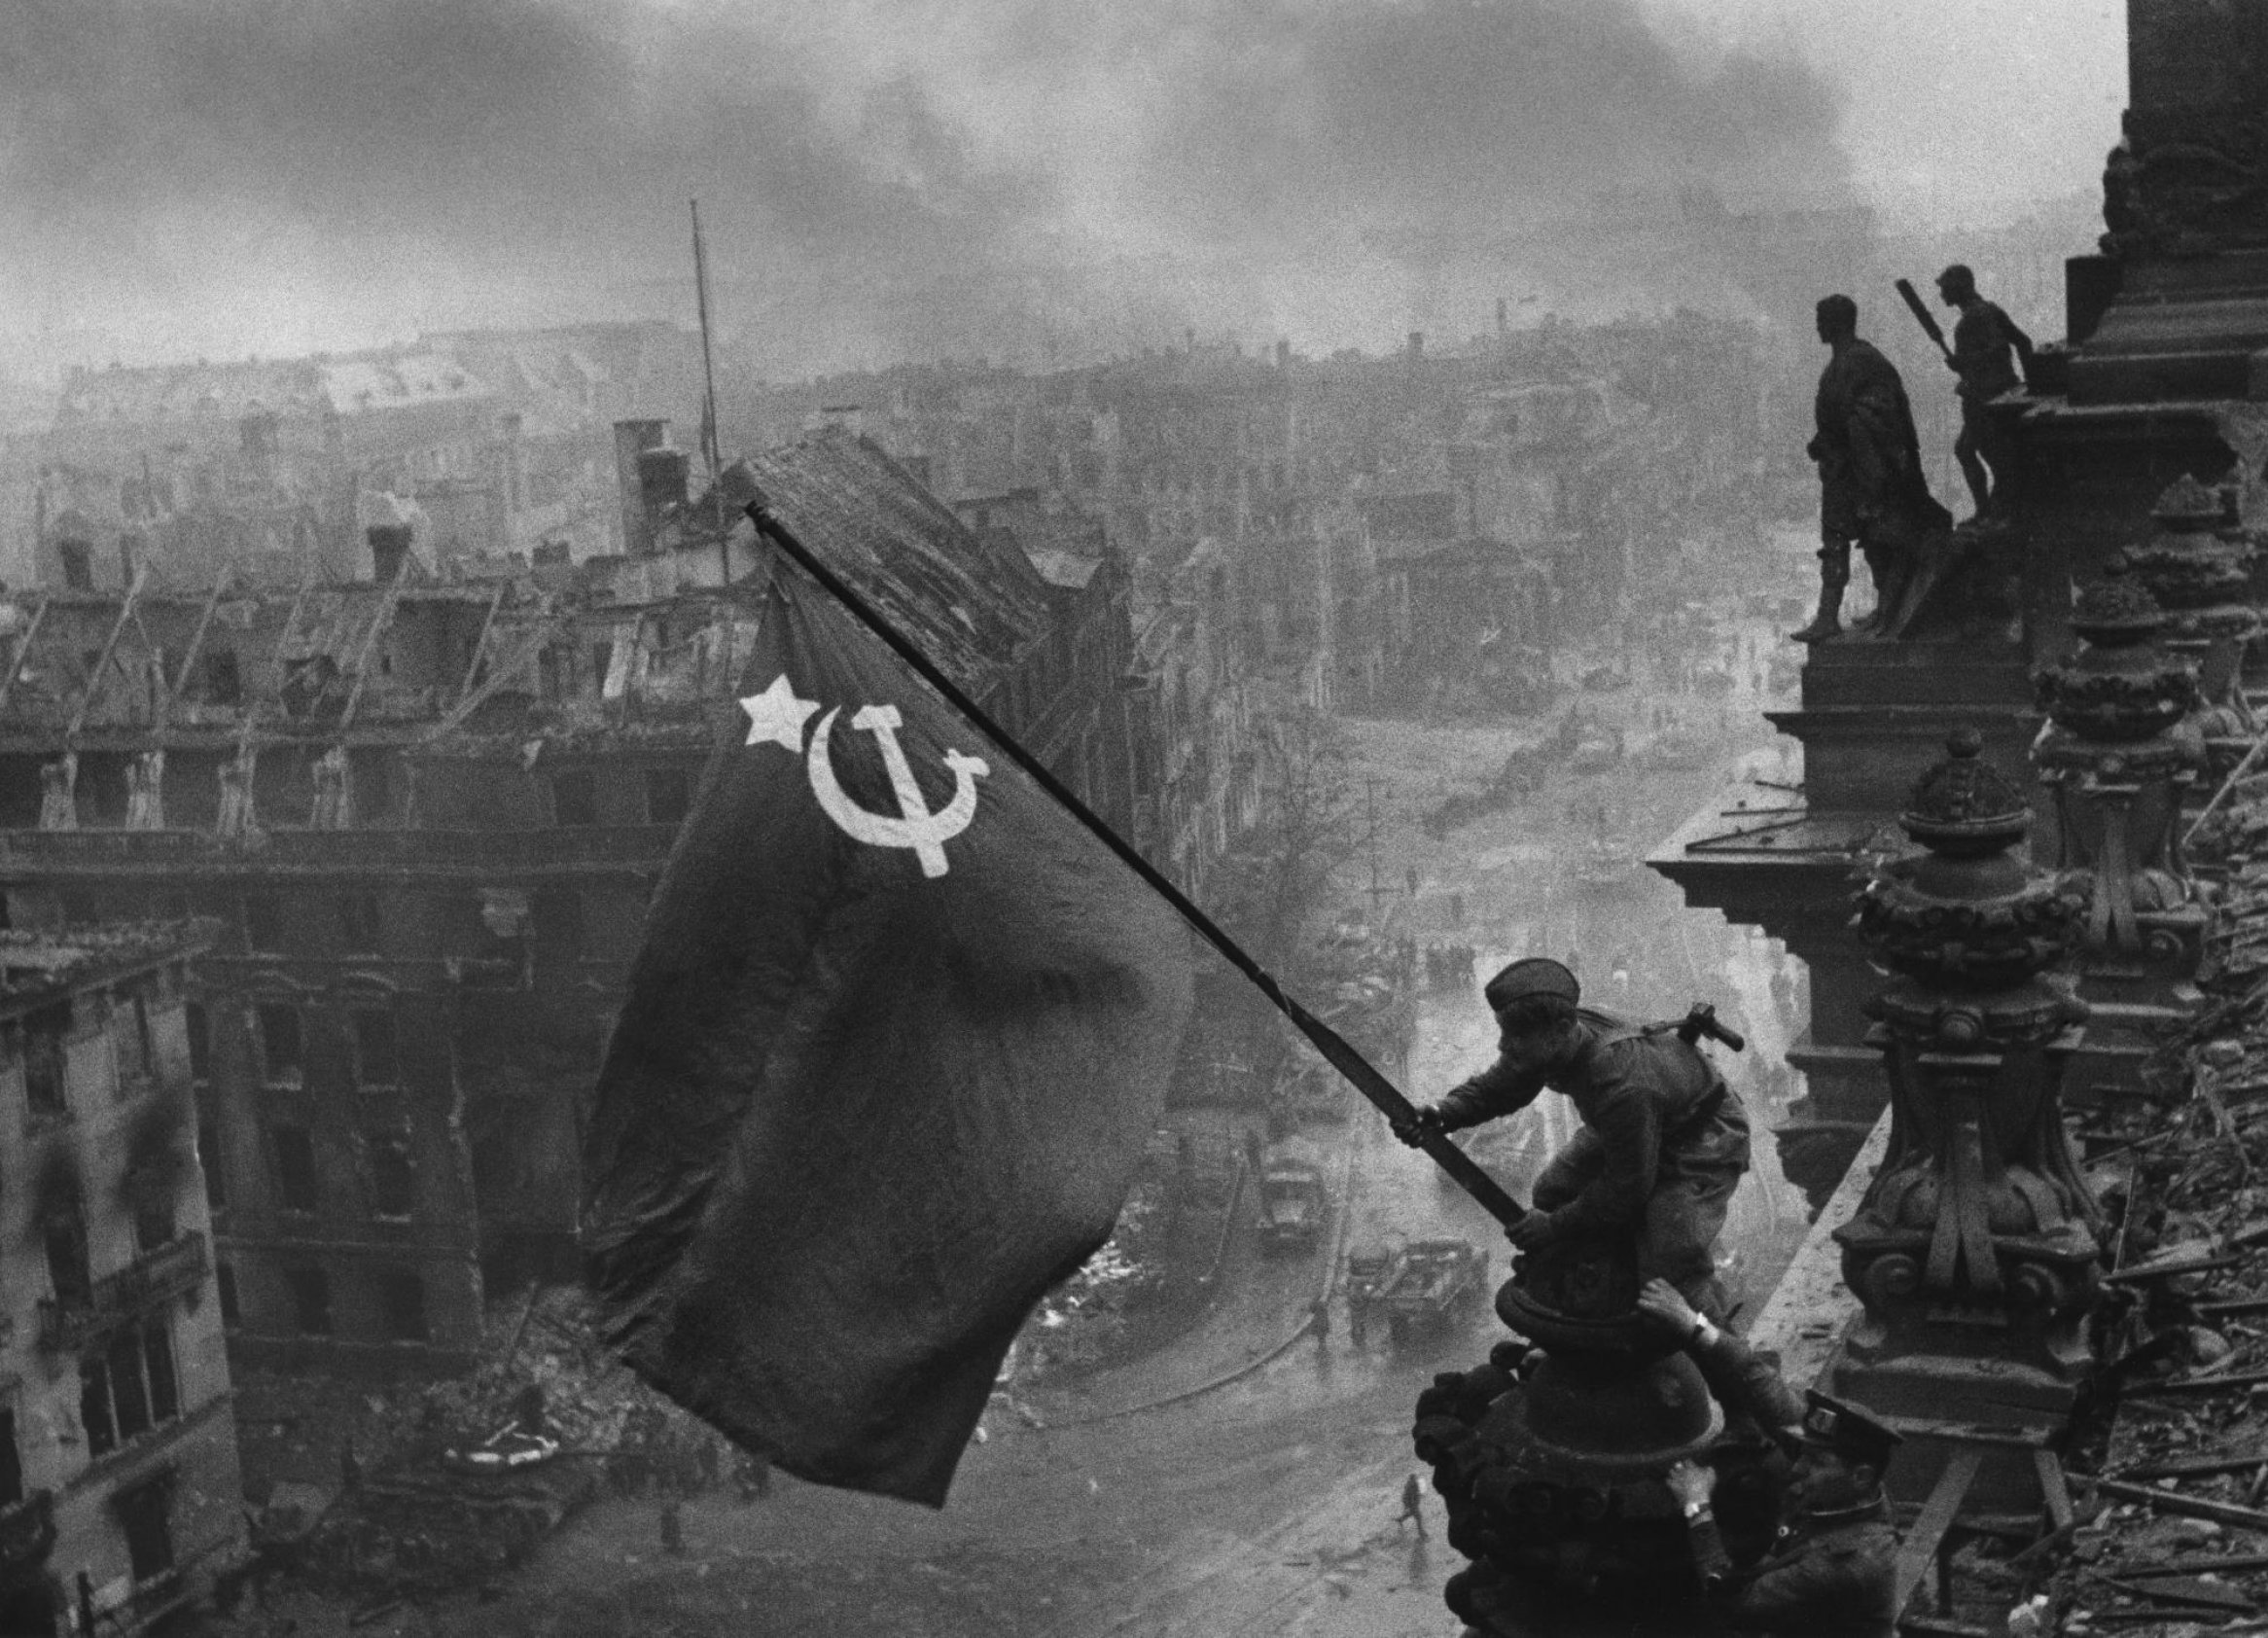 Soviet flag on the Reichstag, Berlin. May 1945